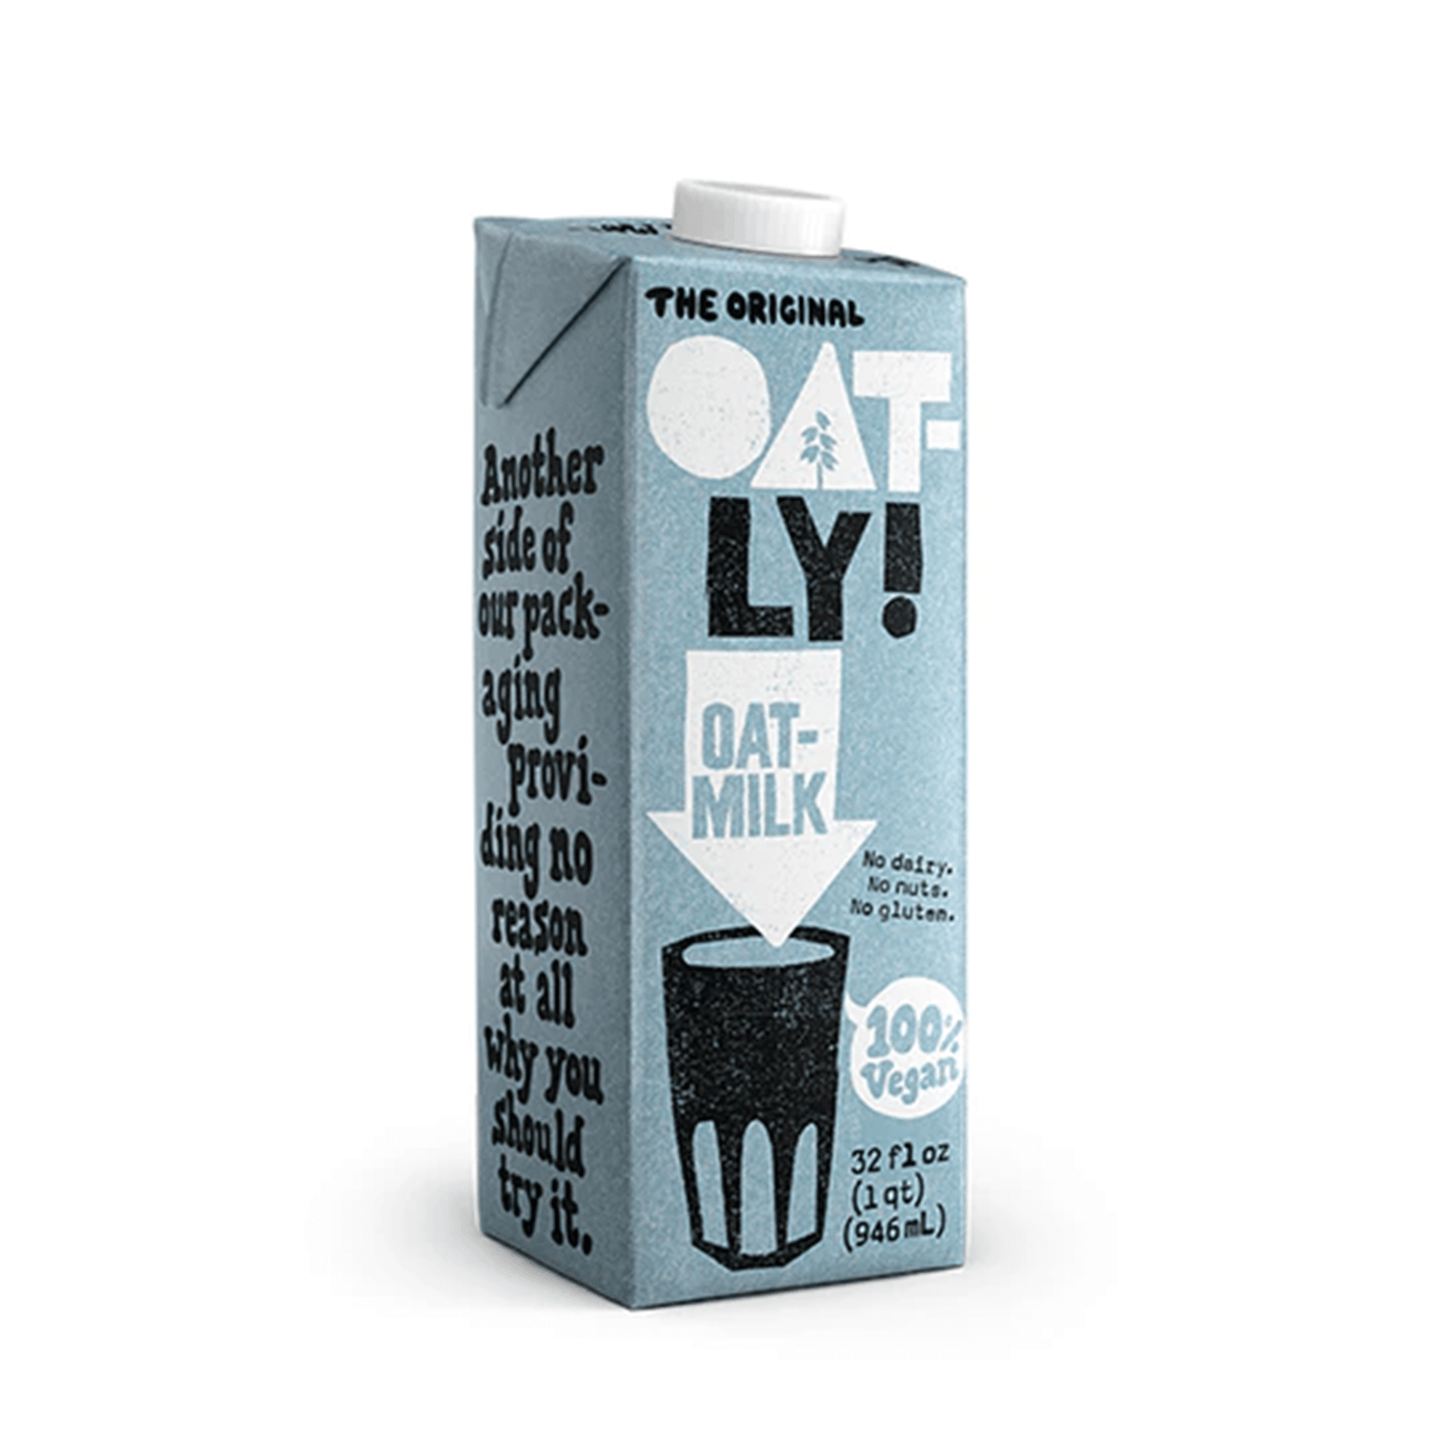  Oatly Original Barista Edition Oat Milk Bulk Pack - 96 ounces  total - 3 Individually Sealed 32 ounce Cartons - Perfect foaming for Lattes  - Measuring Spoons Included with Maple Hills